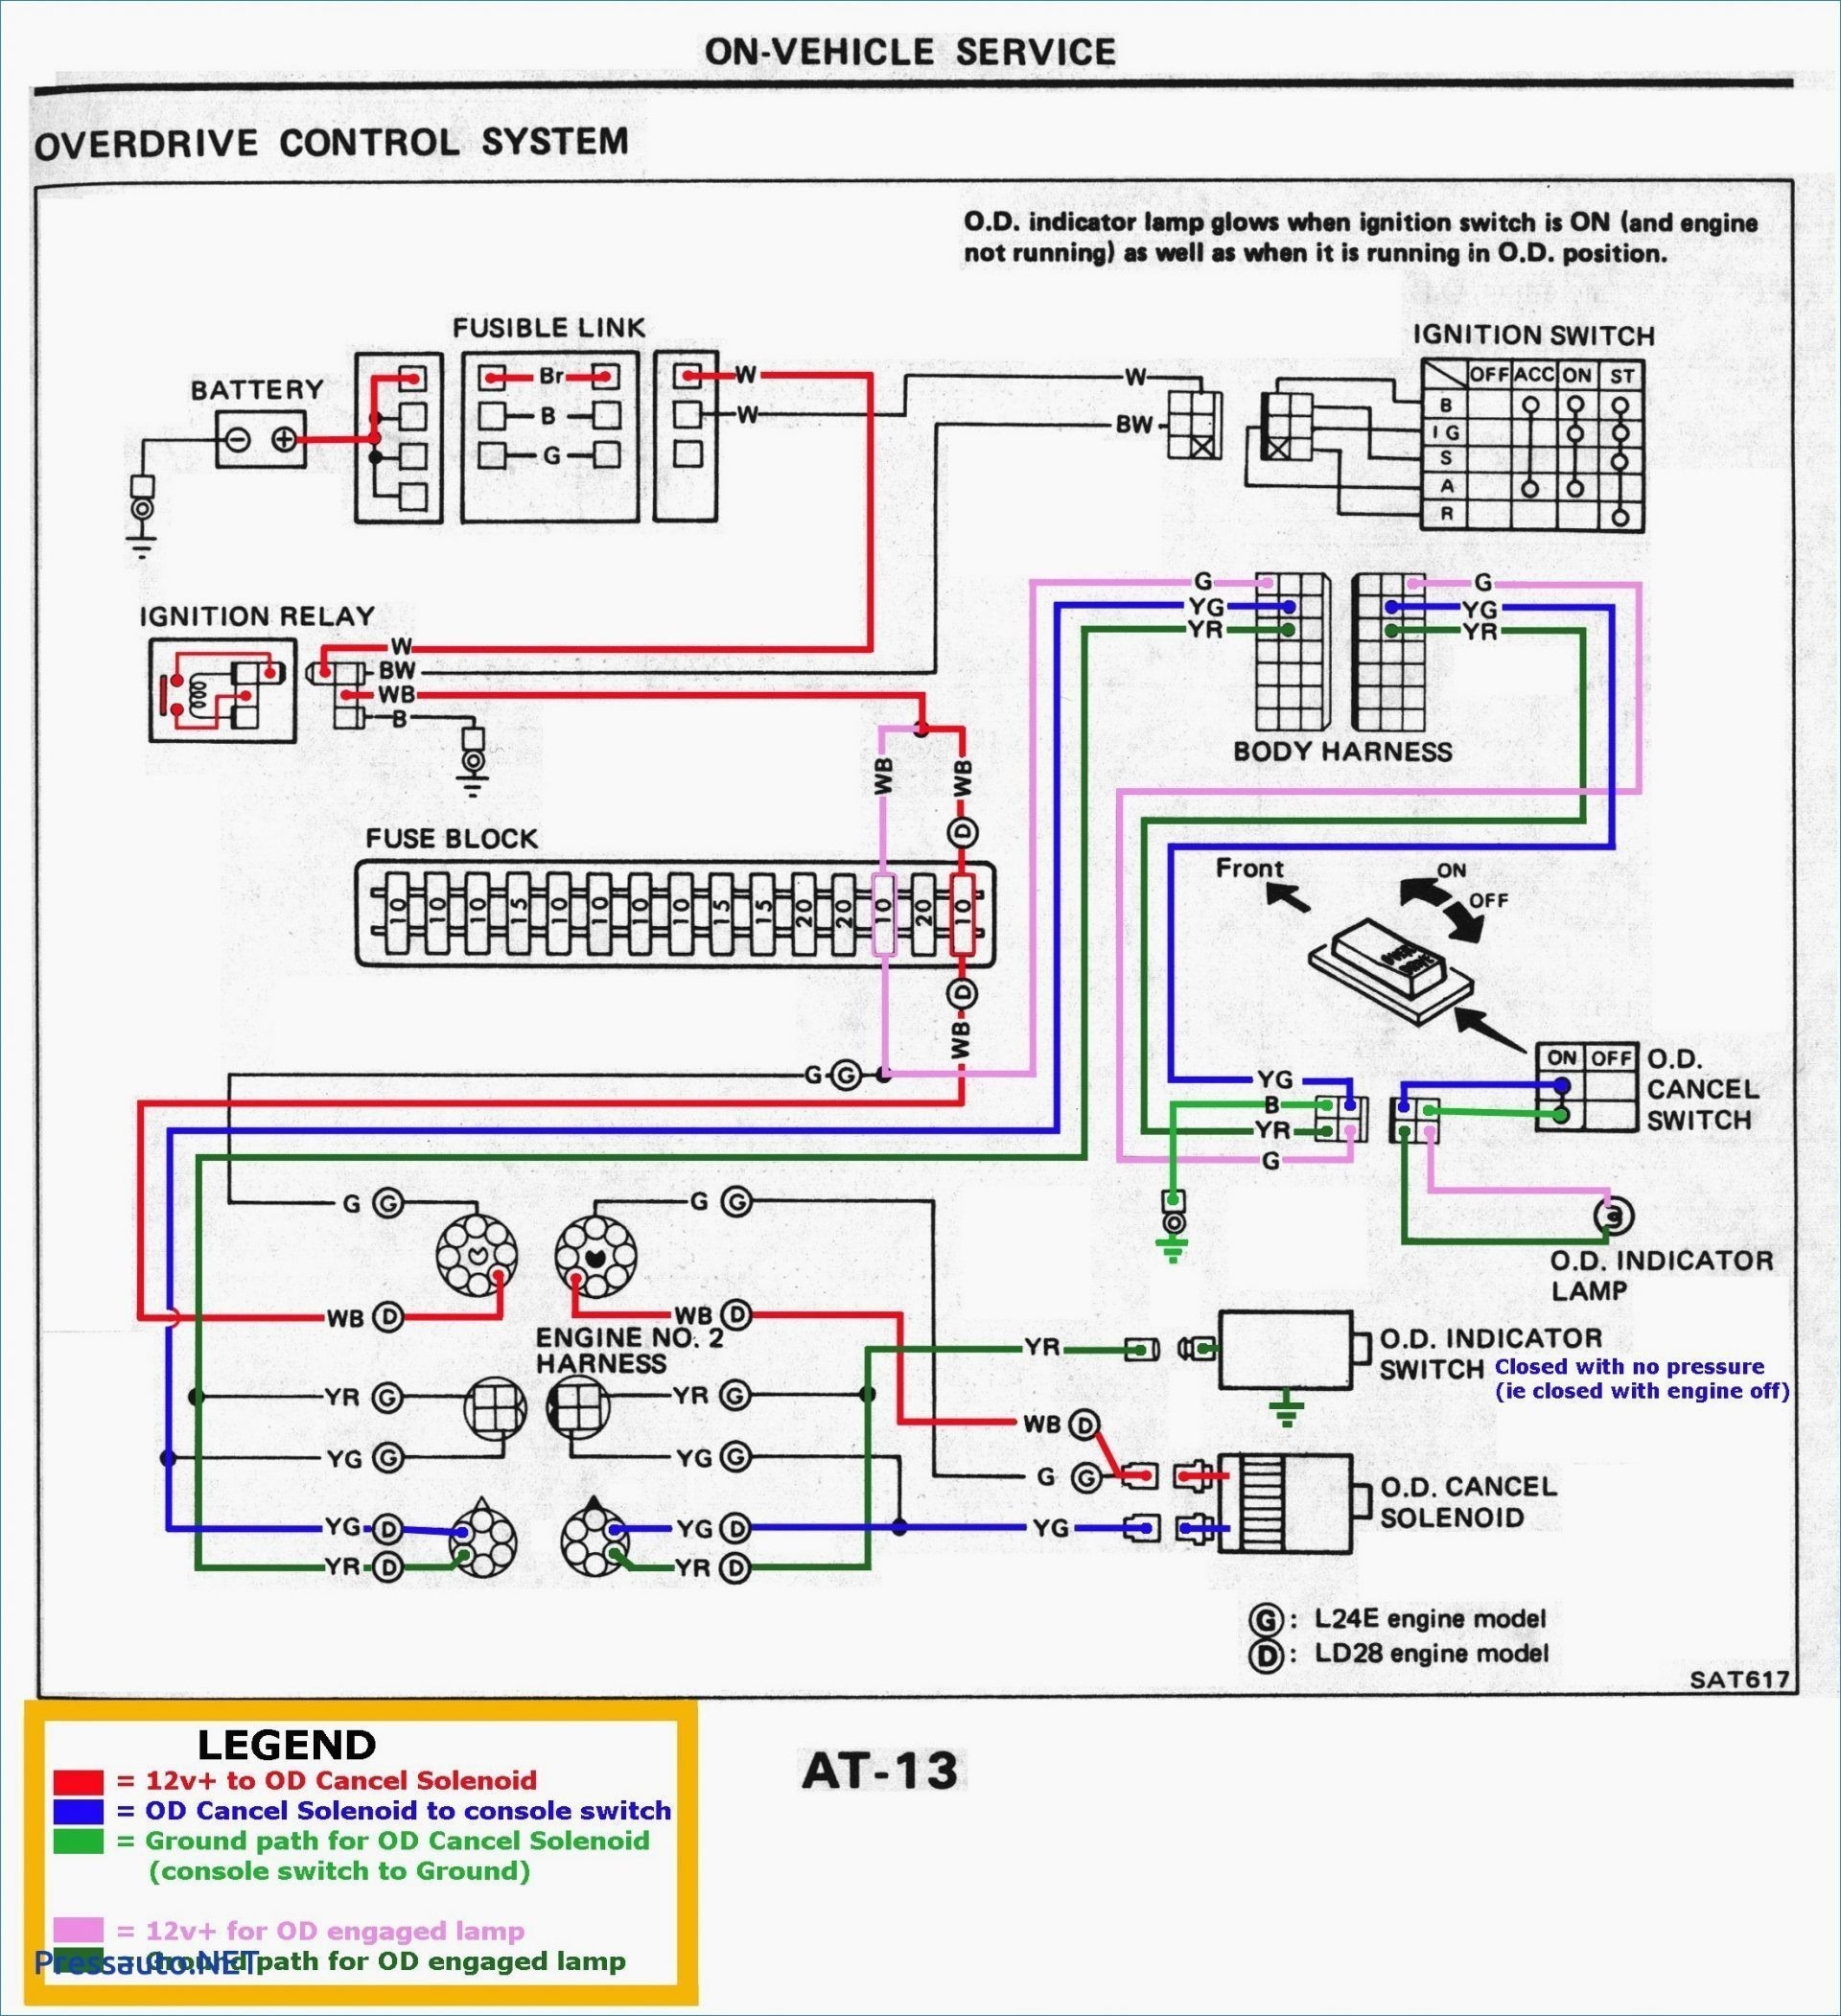 Car Battery Charger Circuit Diagram Pdf Best Electrical Wiring Diagrams for Dummies Pdf • Electrical Outlet Of Car Battery Charger Circuit Diagram Pdf